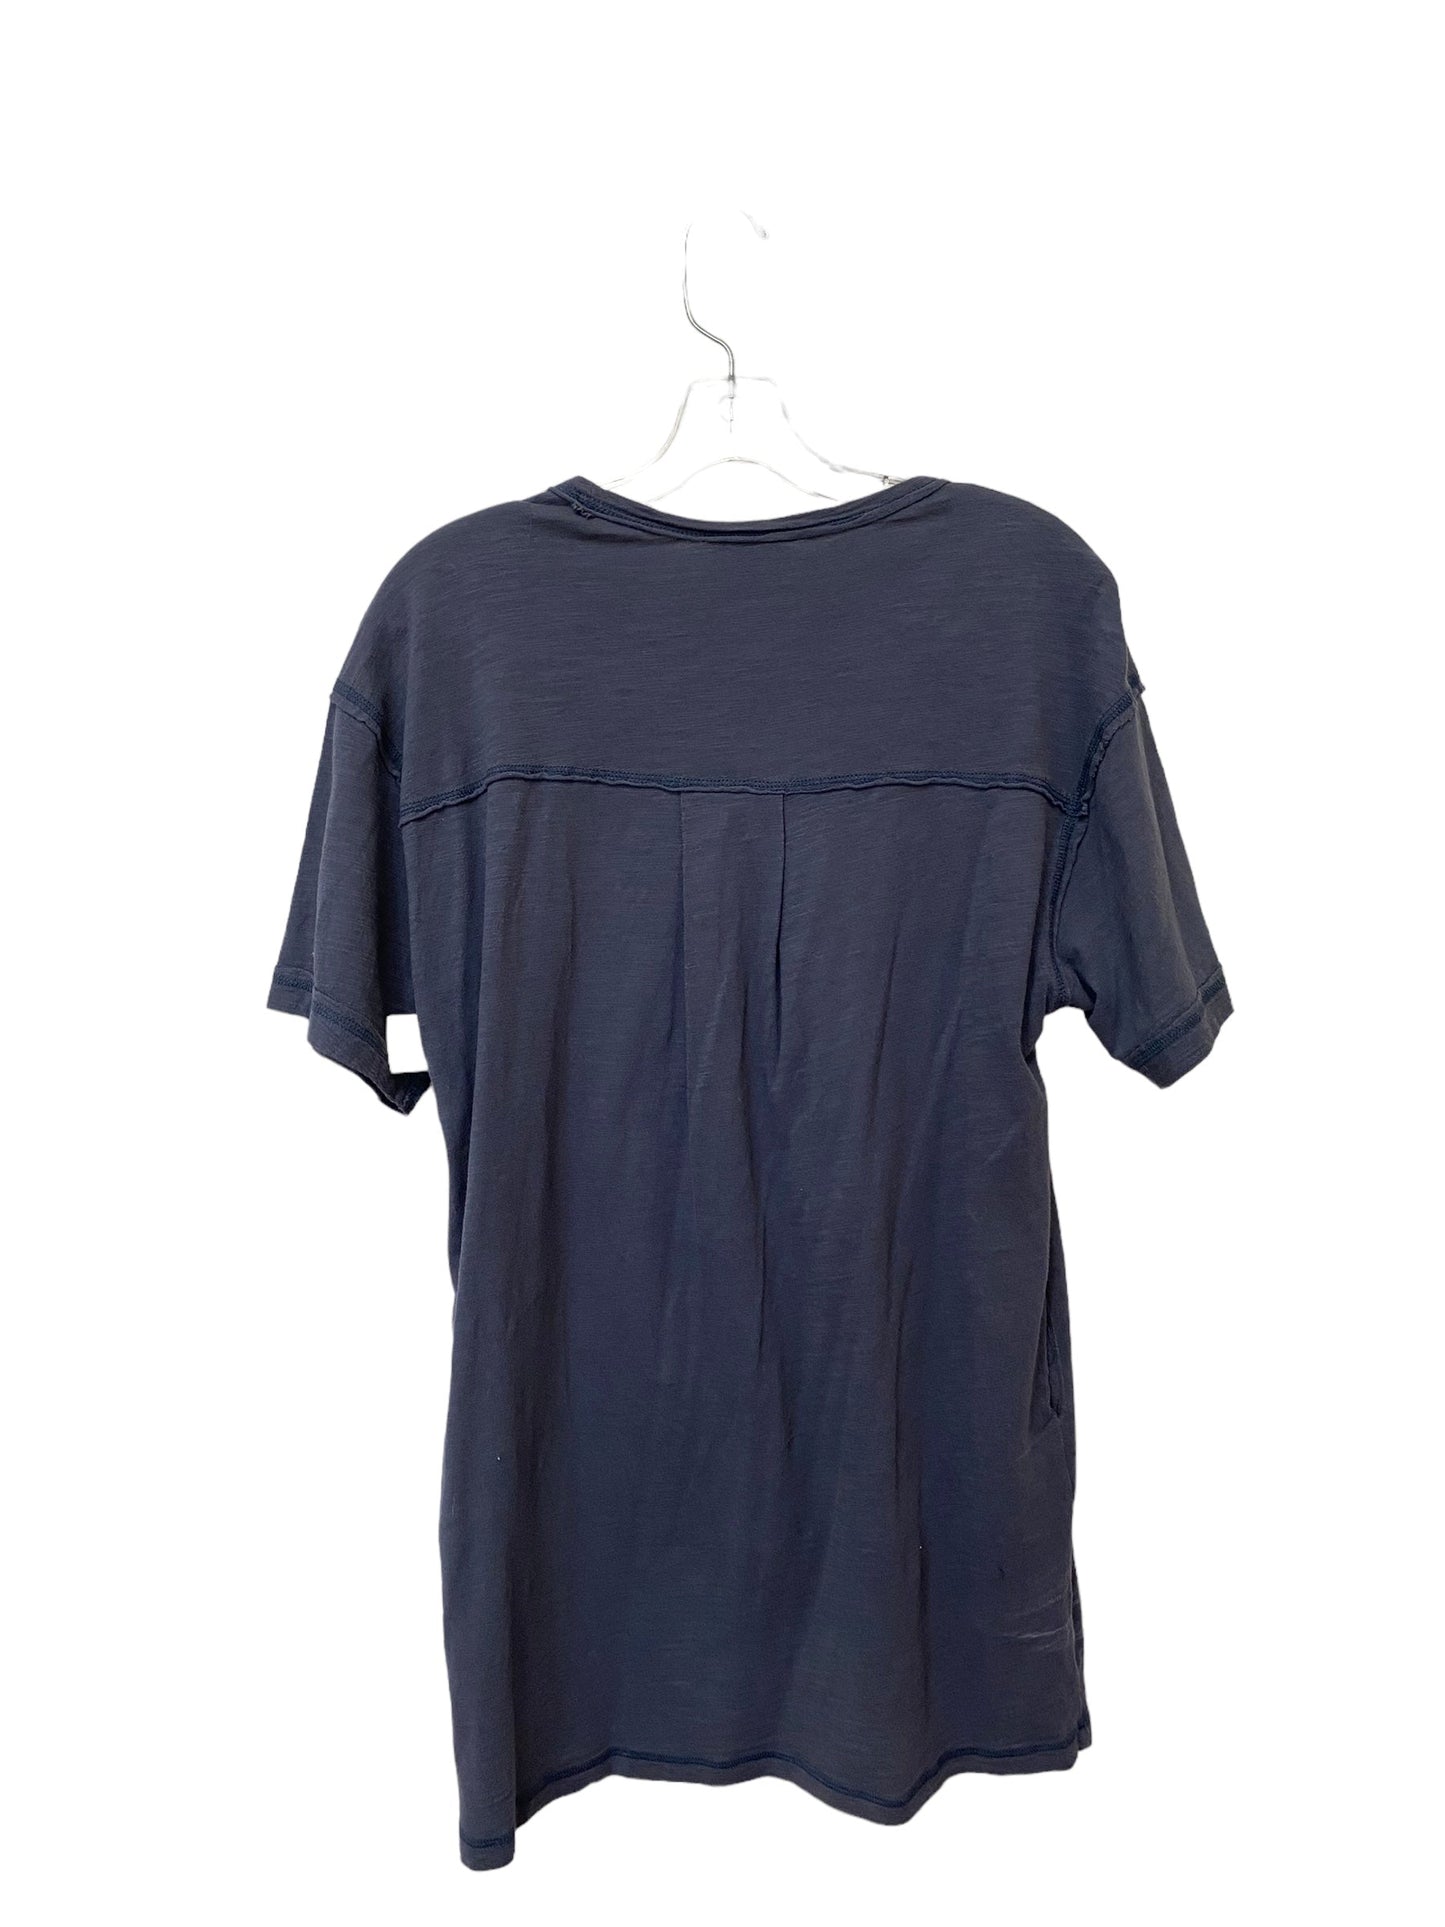 Blue Tunic Short Sleeve Clothes Mentor, Size L